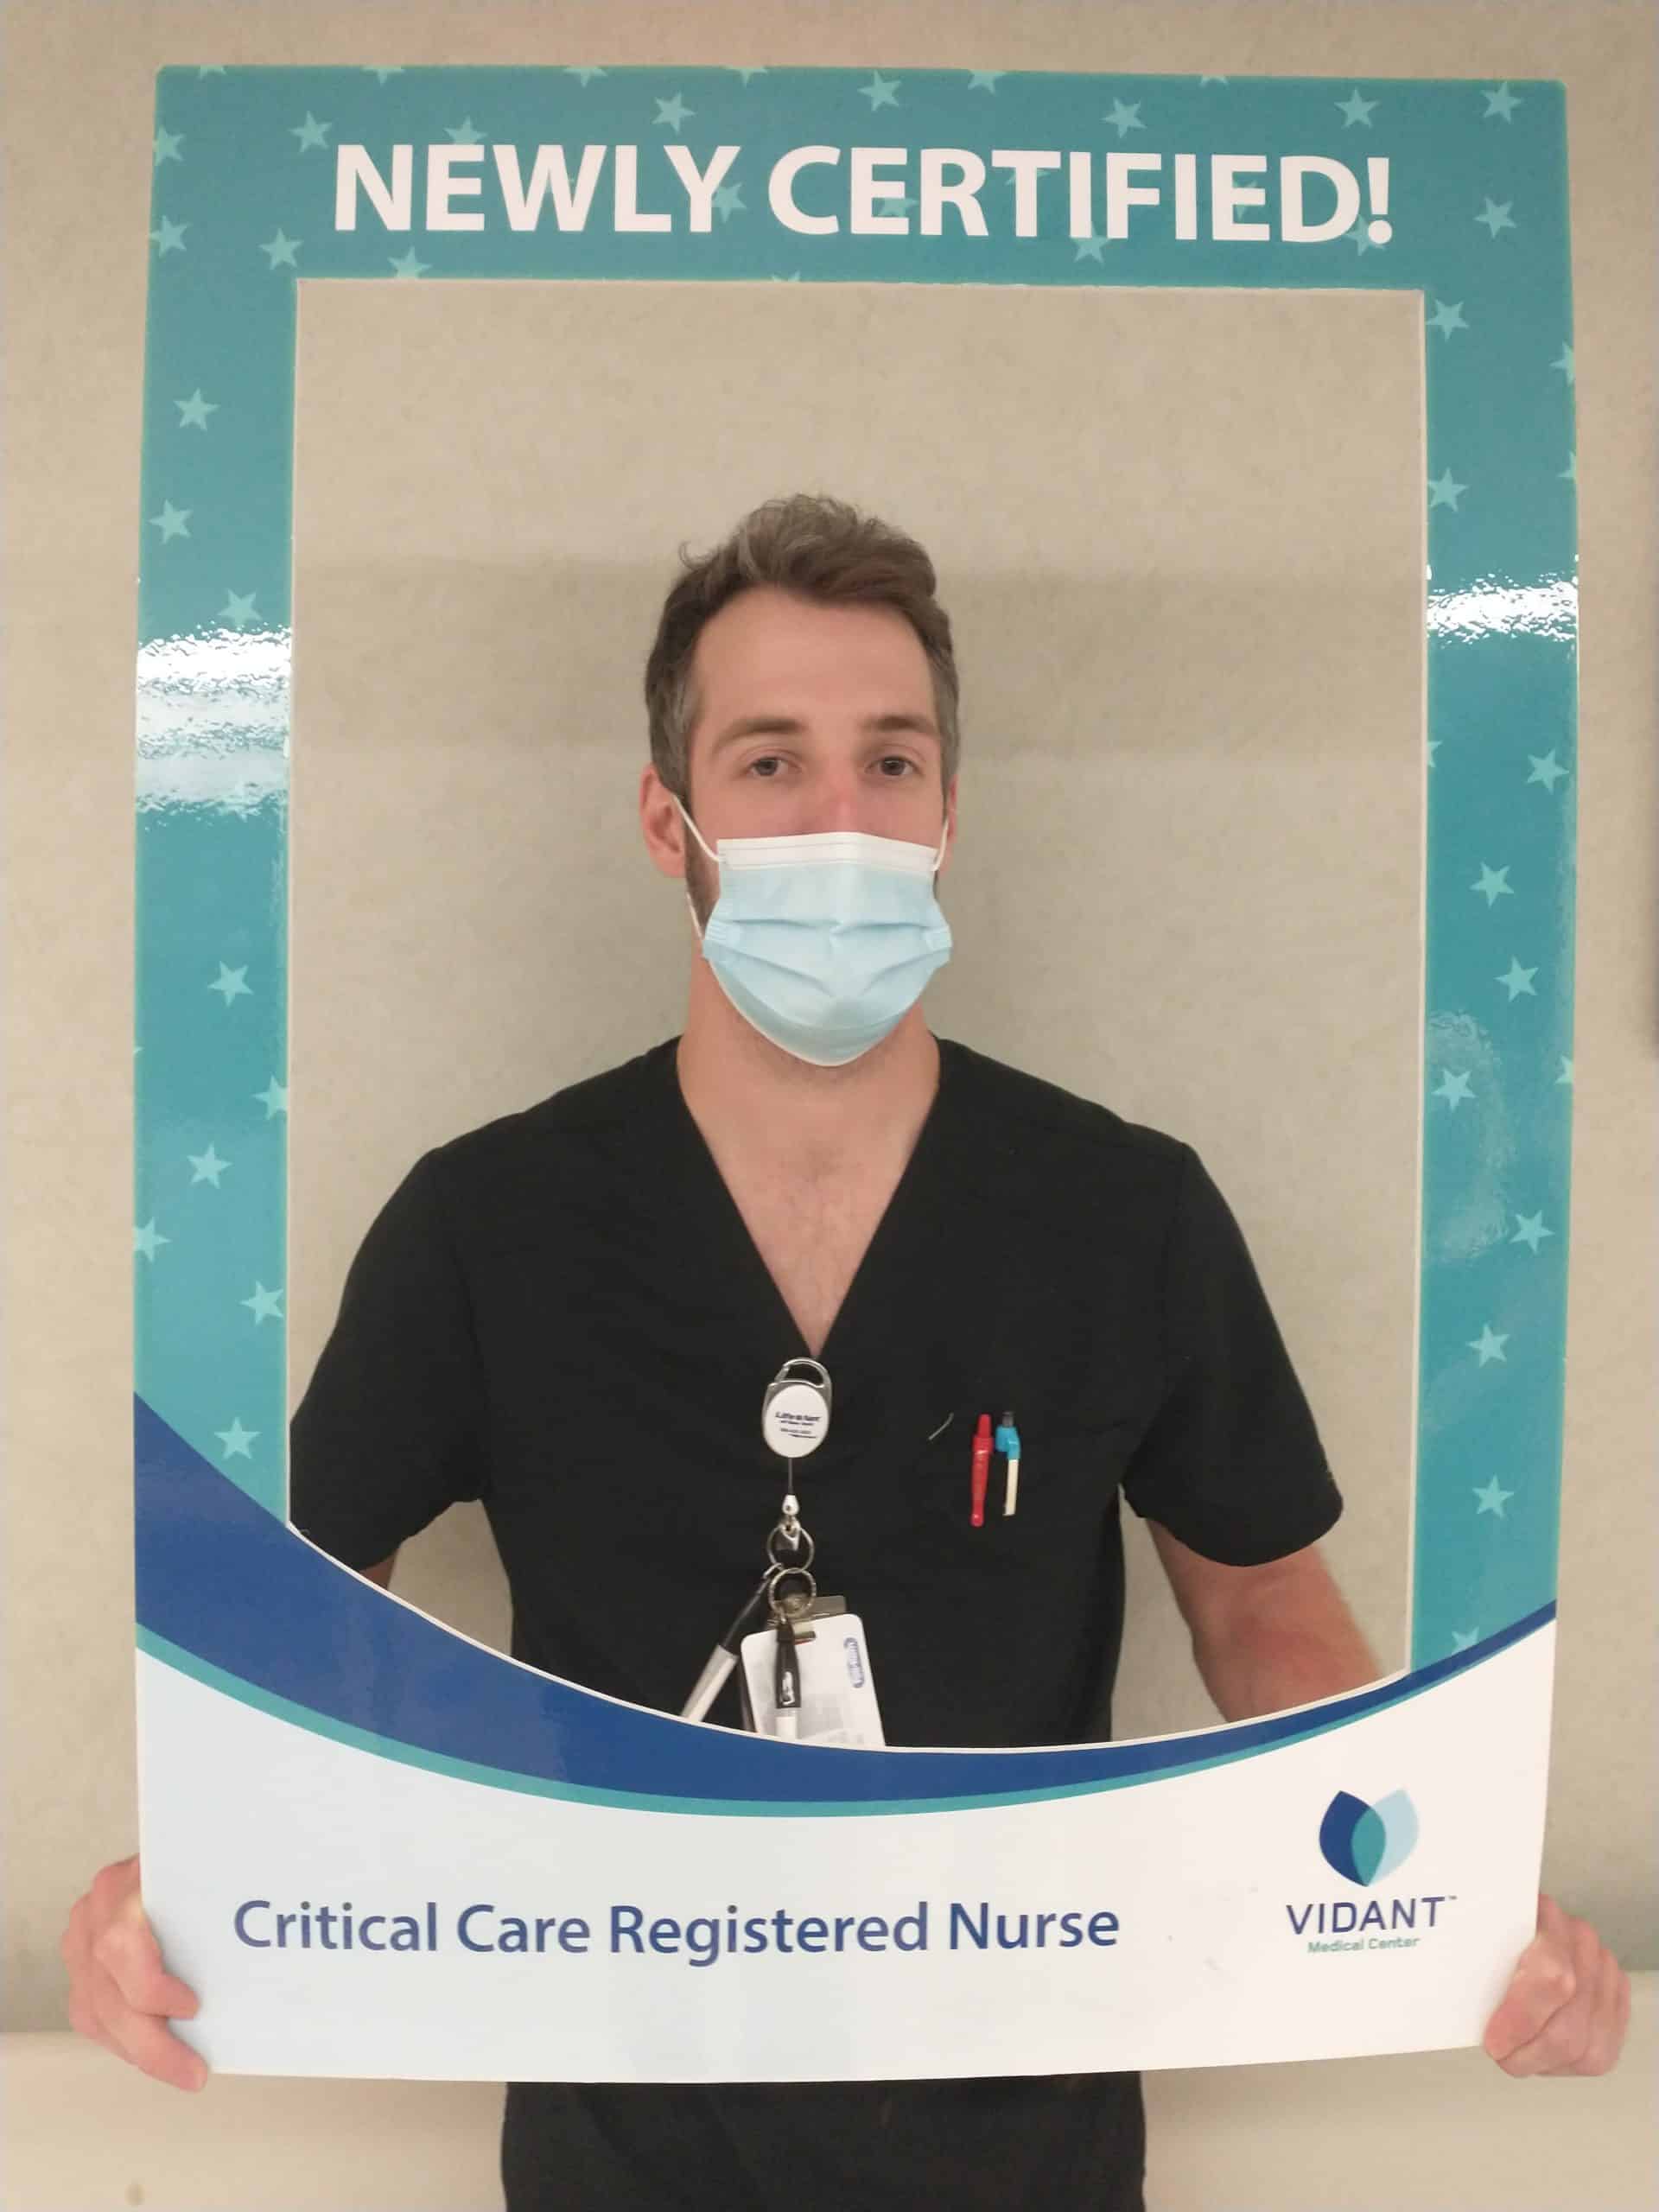 Alex Gilbert, BSN, RN, CCRN, works on the Surgical Intensive Care Unit and he received his critical care registered nurse certification